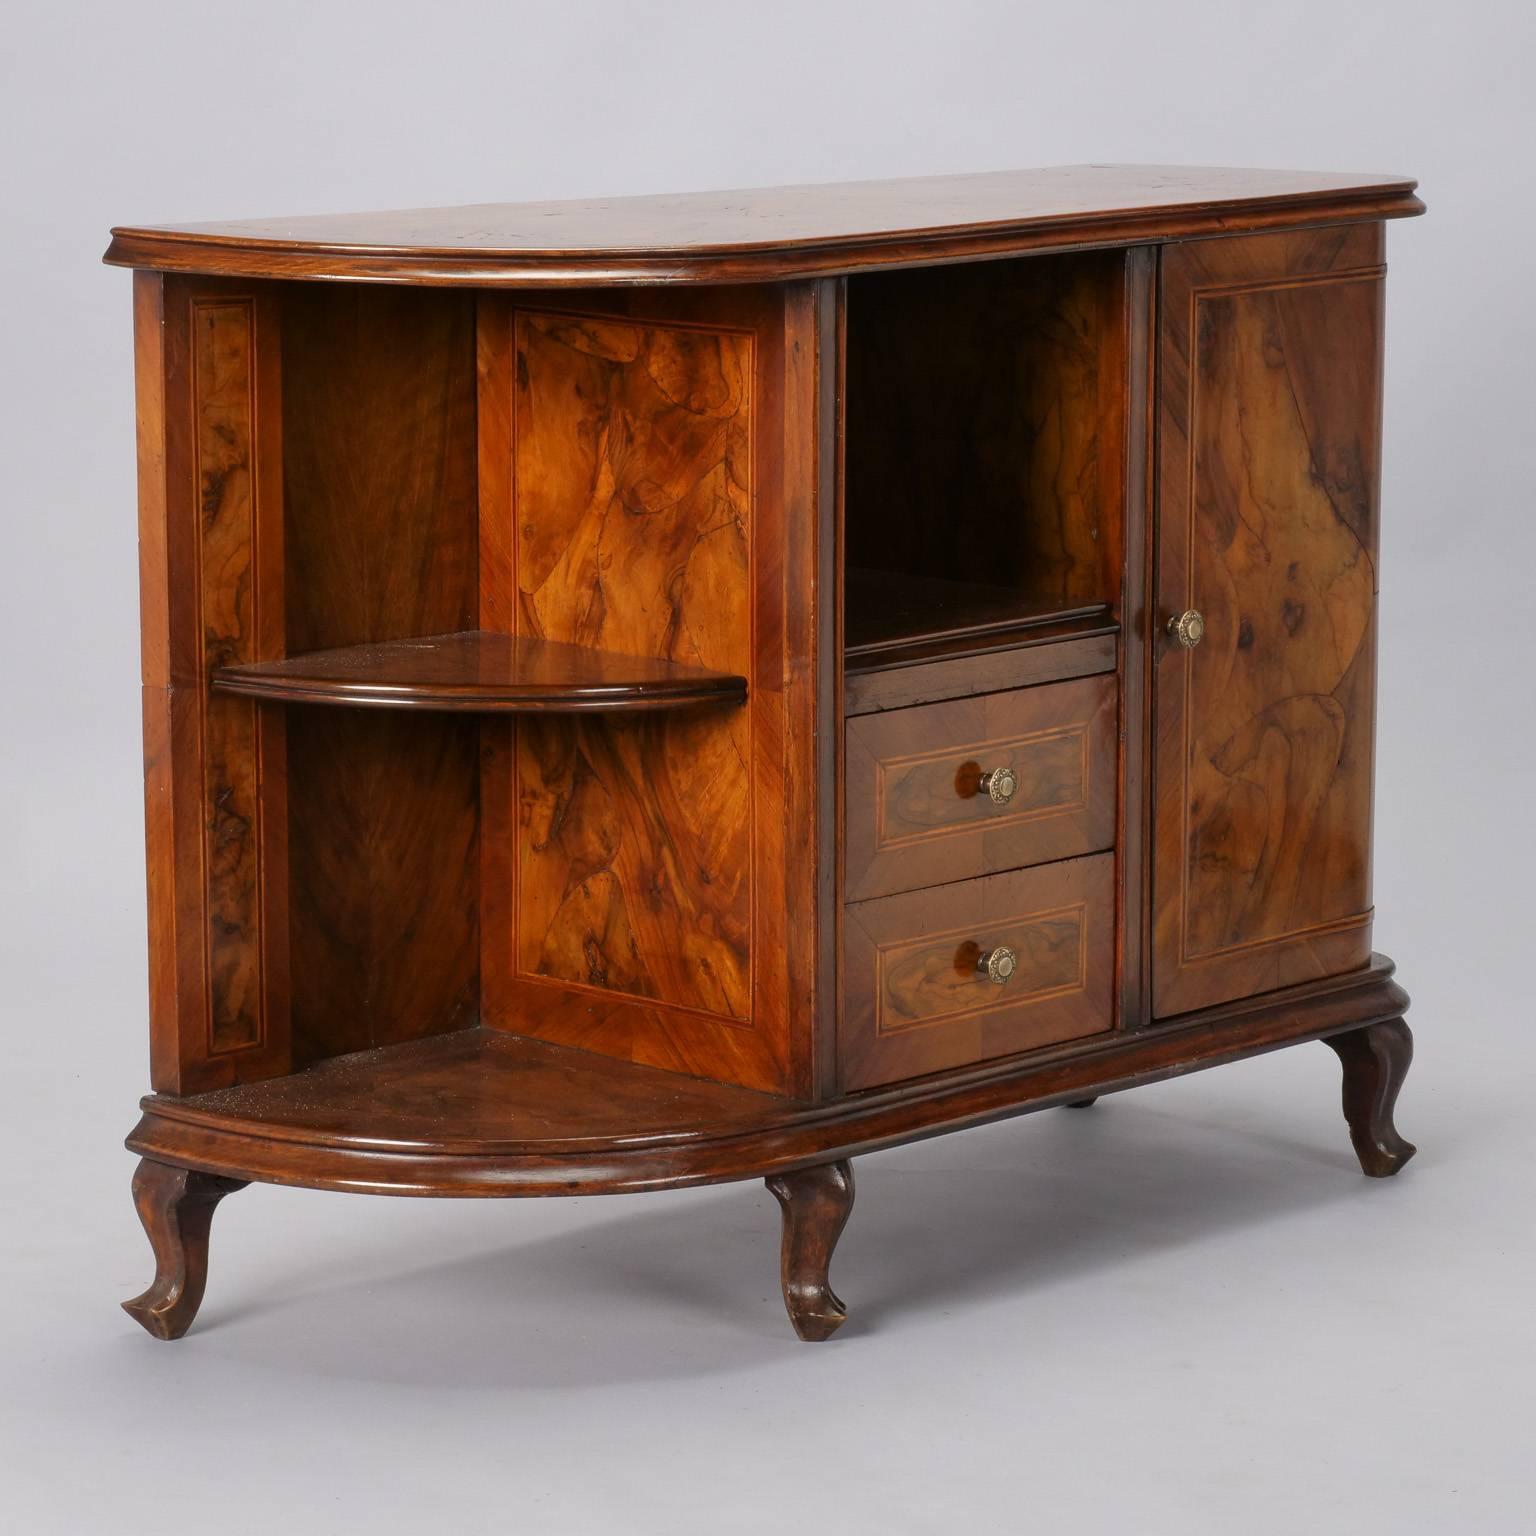 Italian burr walnut side cabinet has curved shape, open storage compartment over two functional drawers in the center flanked by a open corner shelf and cabinet with hinged door and one internal shelf, circa 1930s. Dramatic burr wood veneer and